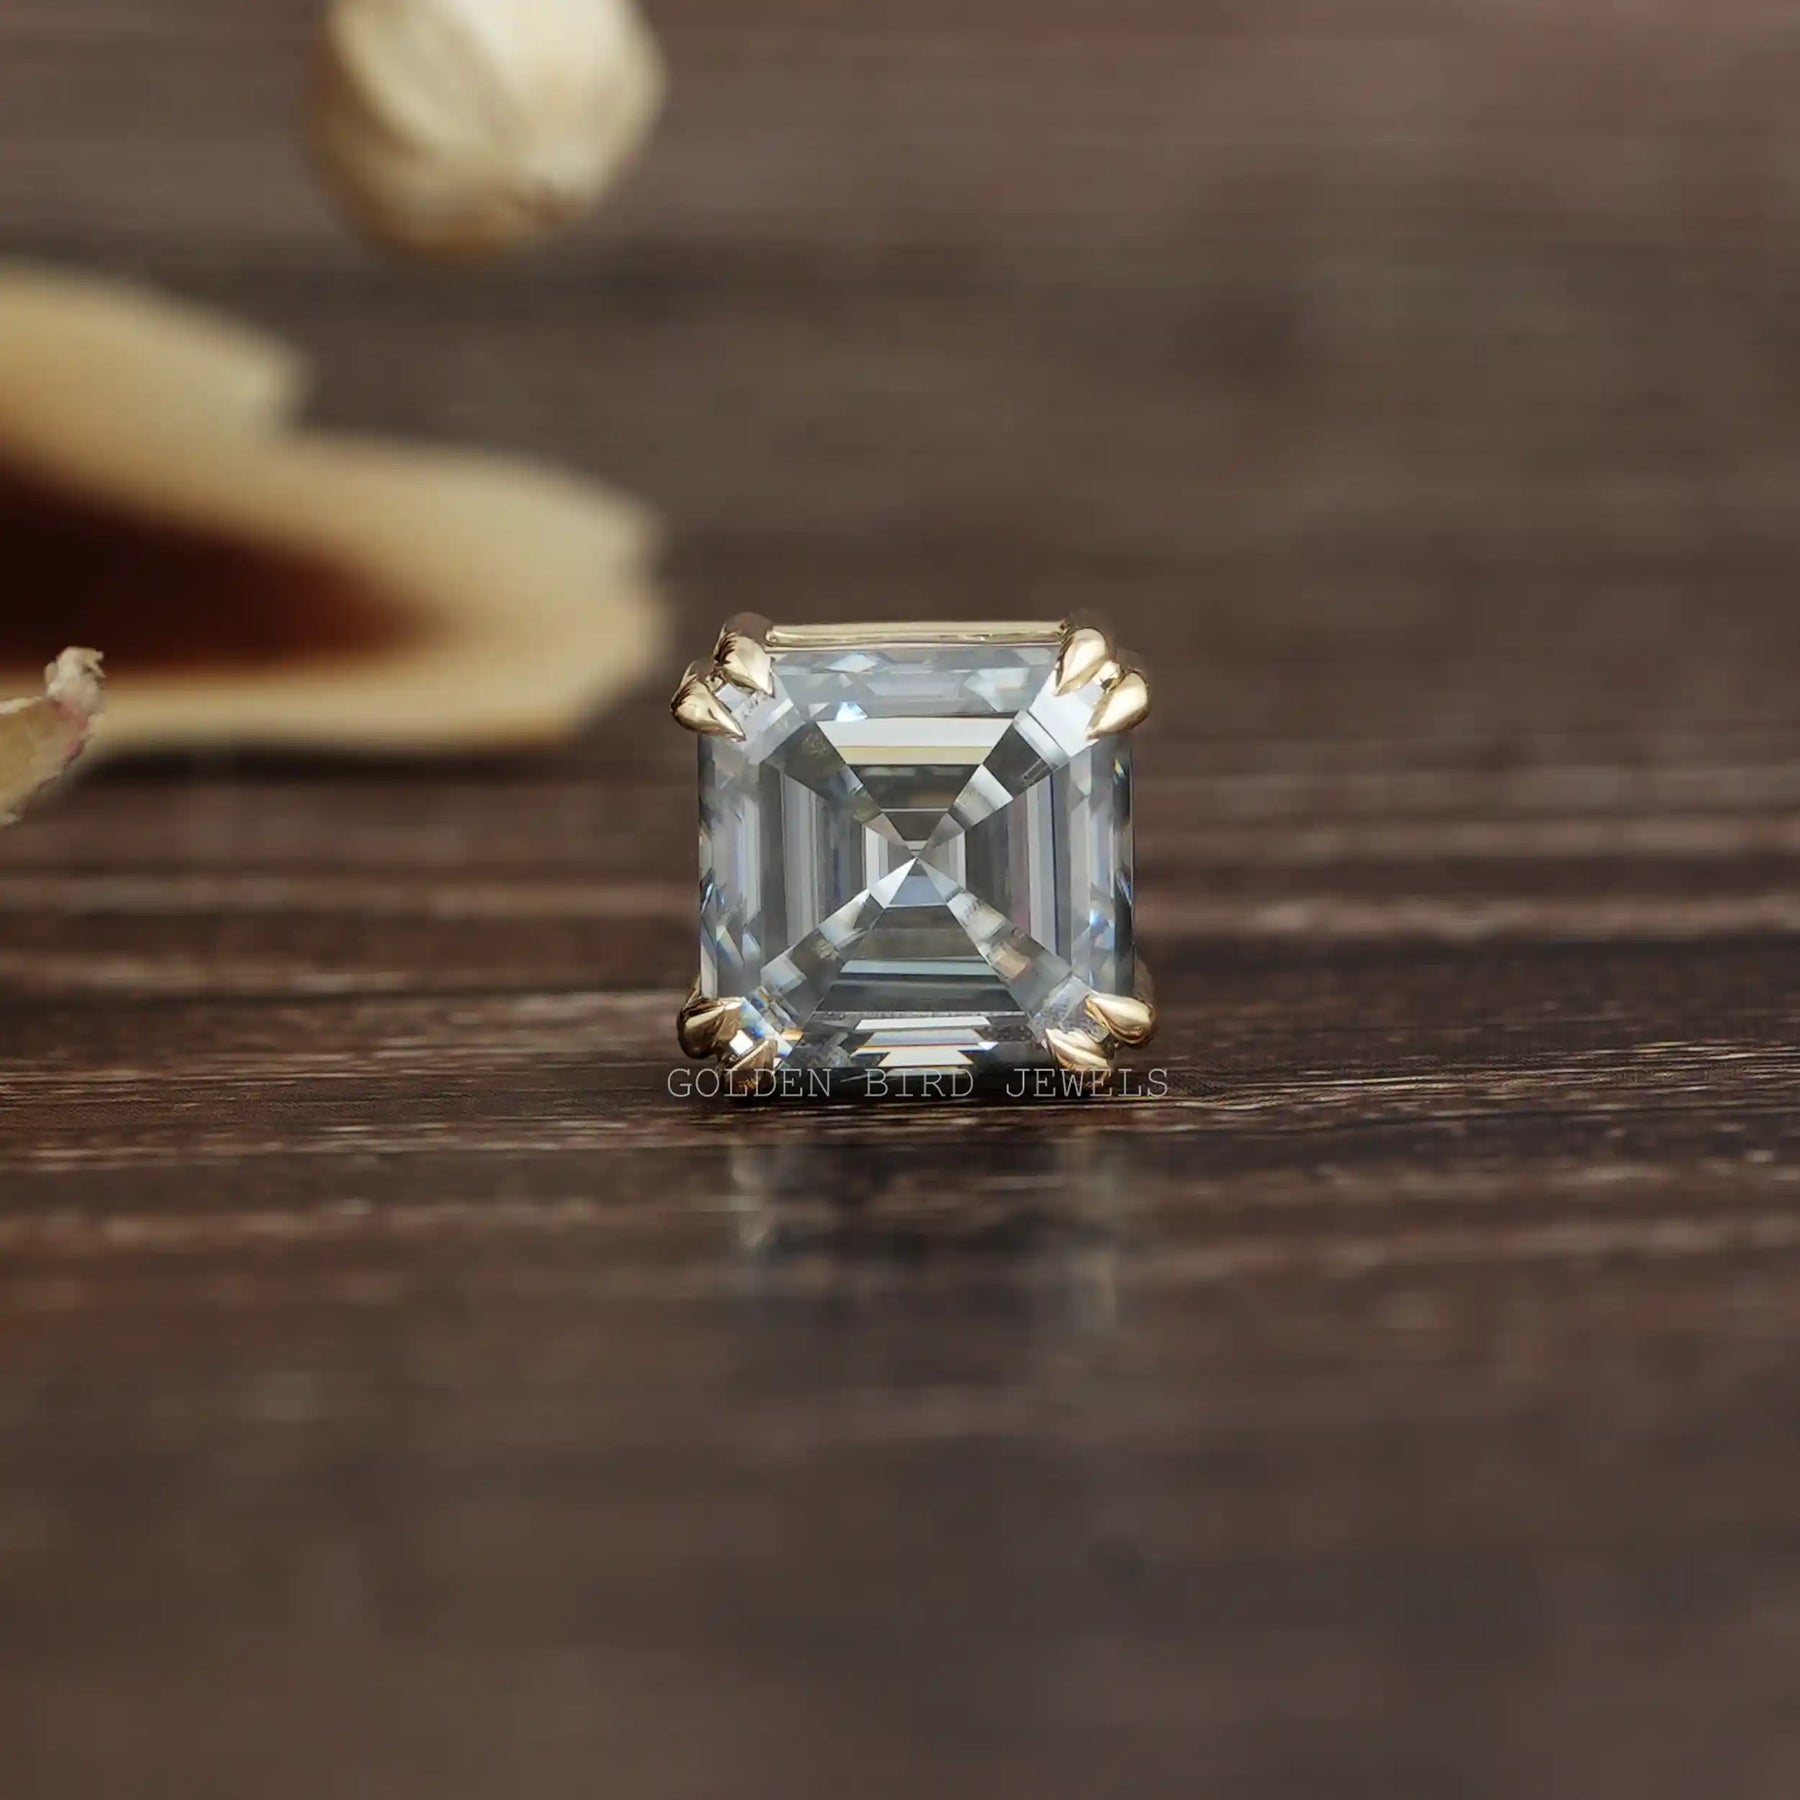 [Front view of asscher cut solitaire moissanite pendant made of double prong setting]-[Golden Bird Jewels]